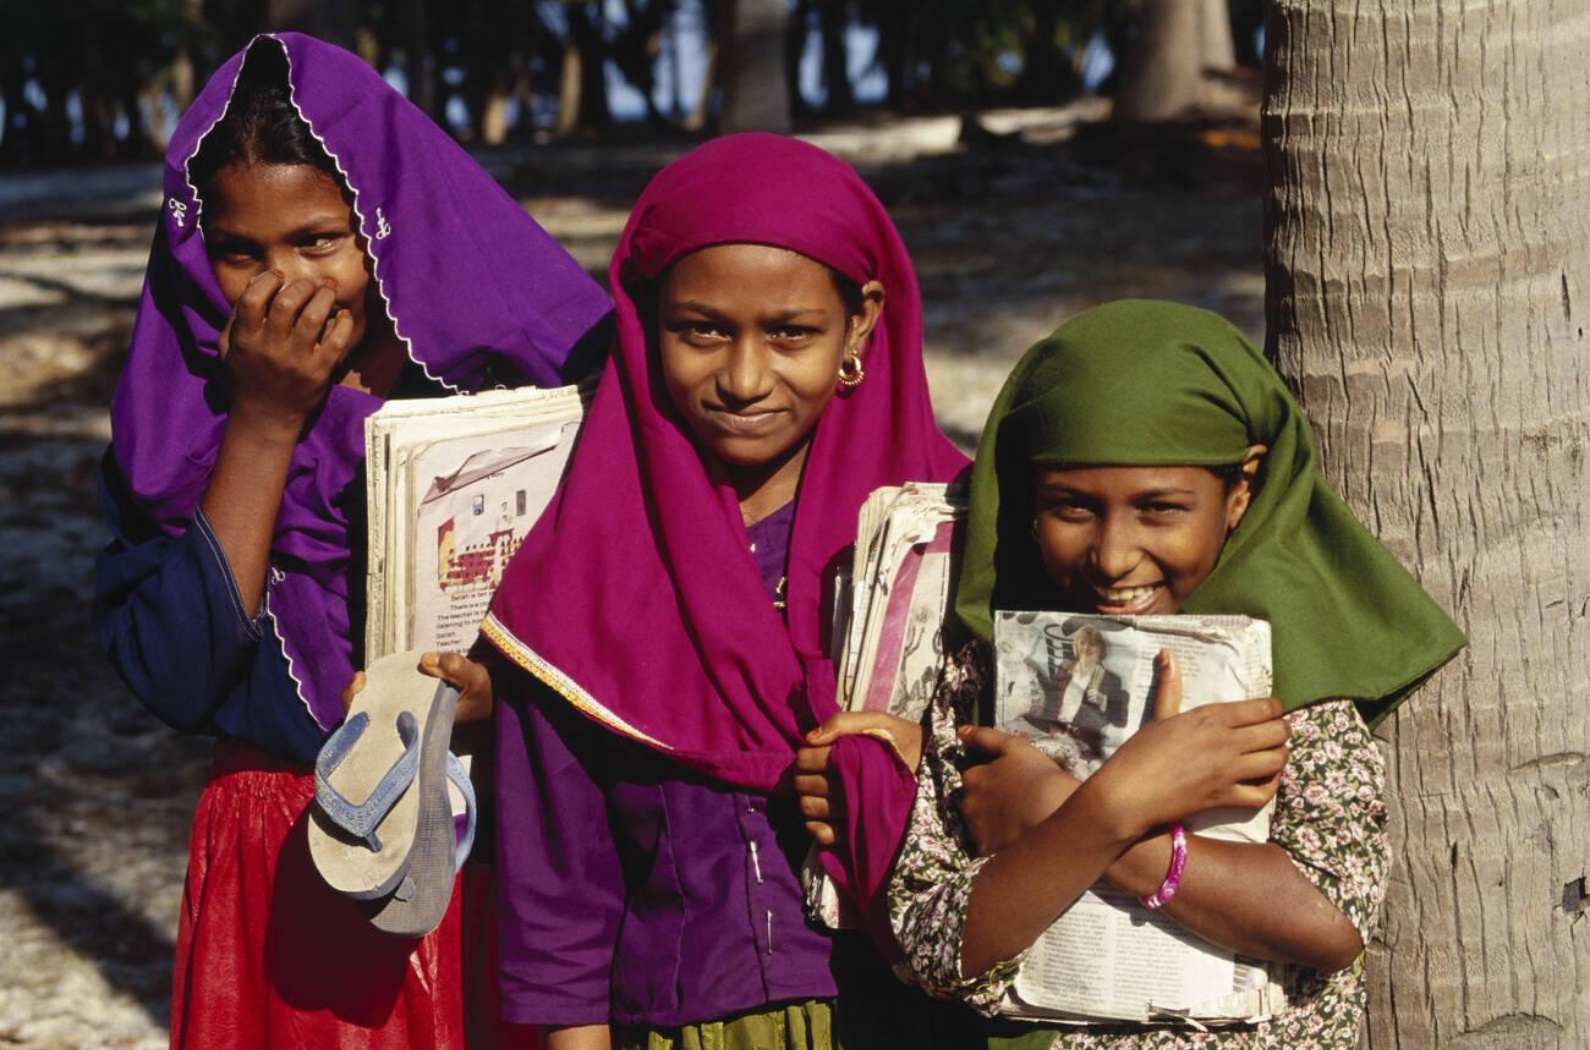 Muslim three girl students shy smiling laugh books in hand head covered going to school